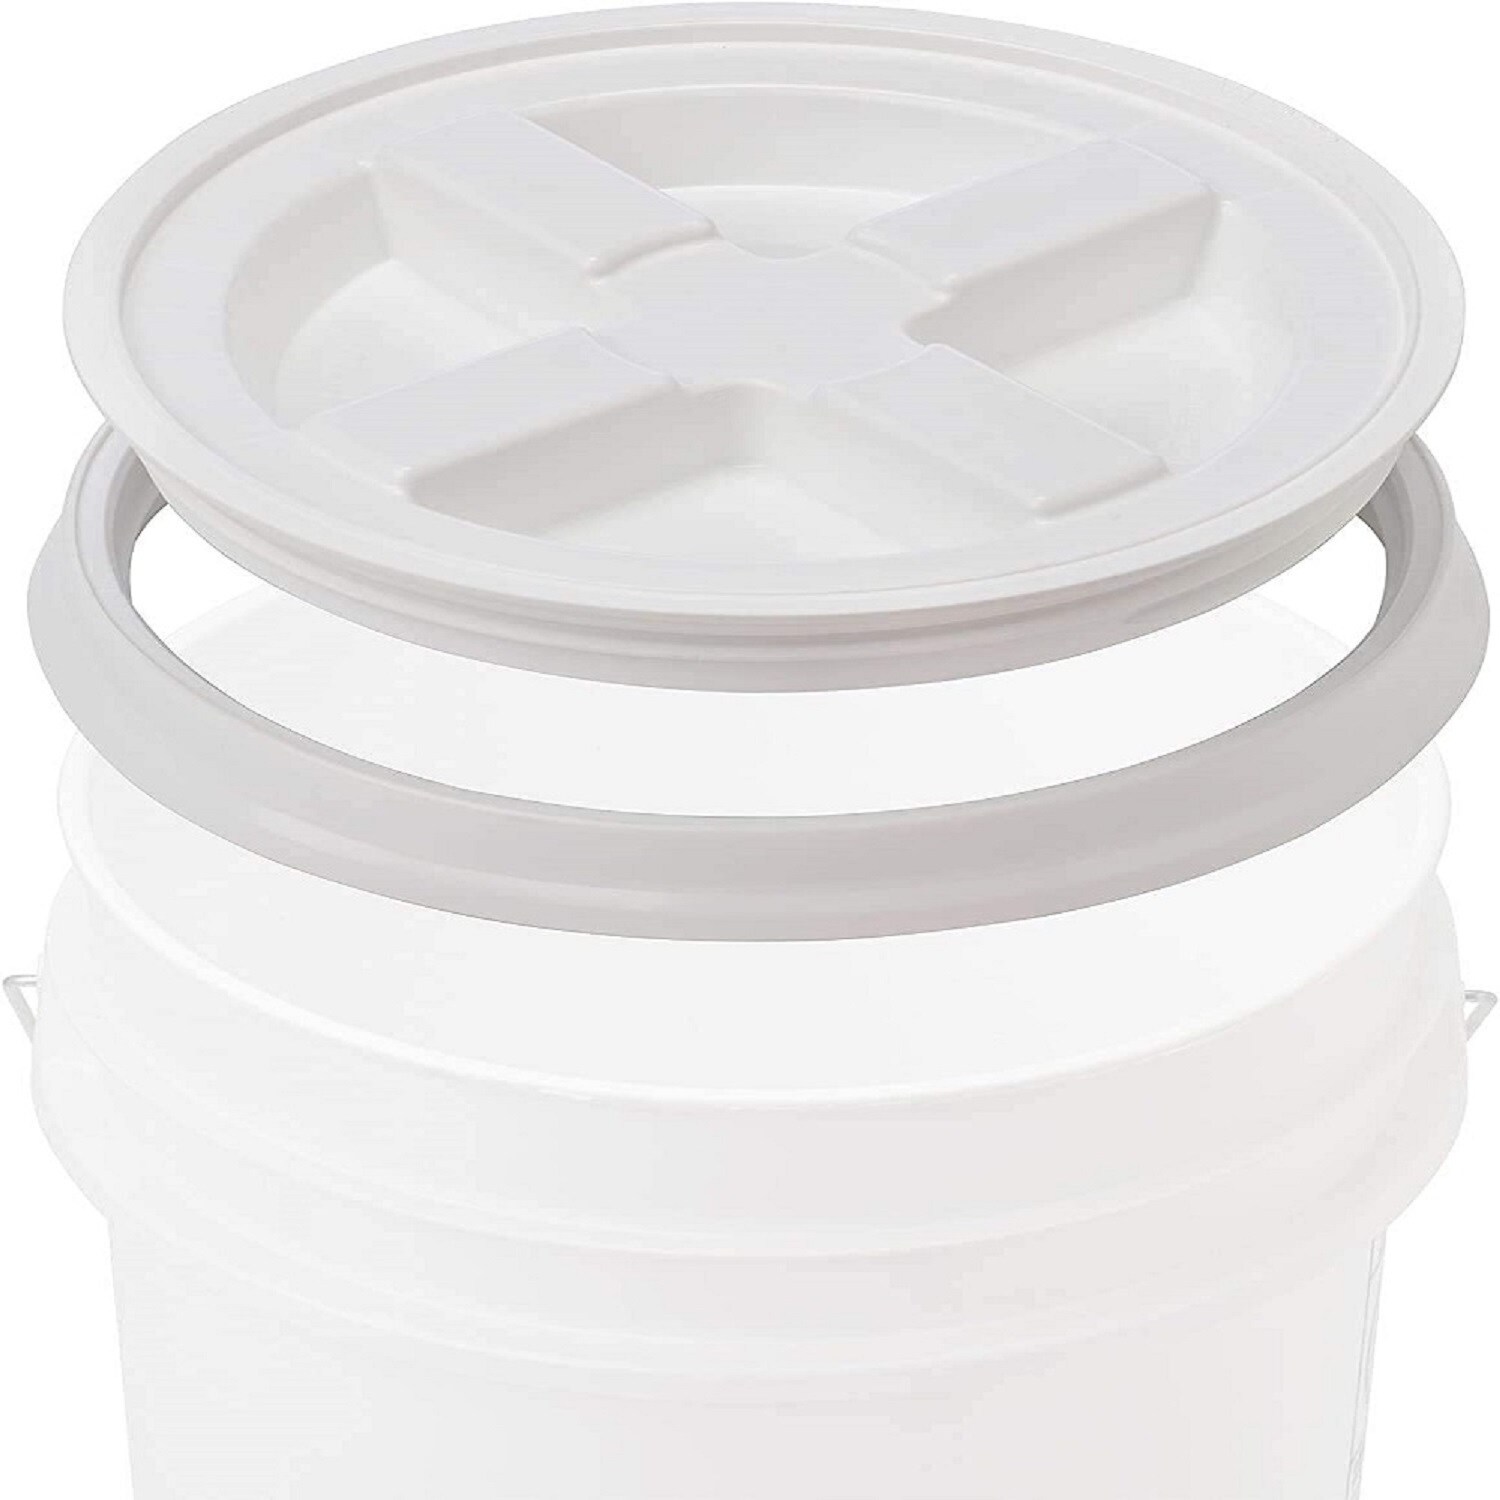 ePackageSupply 1/4 Gallon (32 oz) 1 Quart Food Storage Containers with Lids  -Freezer and Microwave Safe Storage Containers, Round Plastic Containers